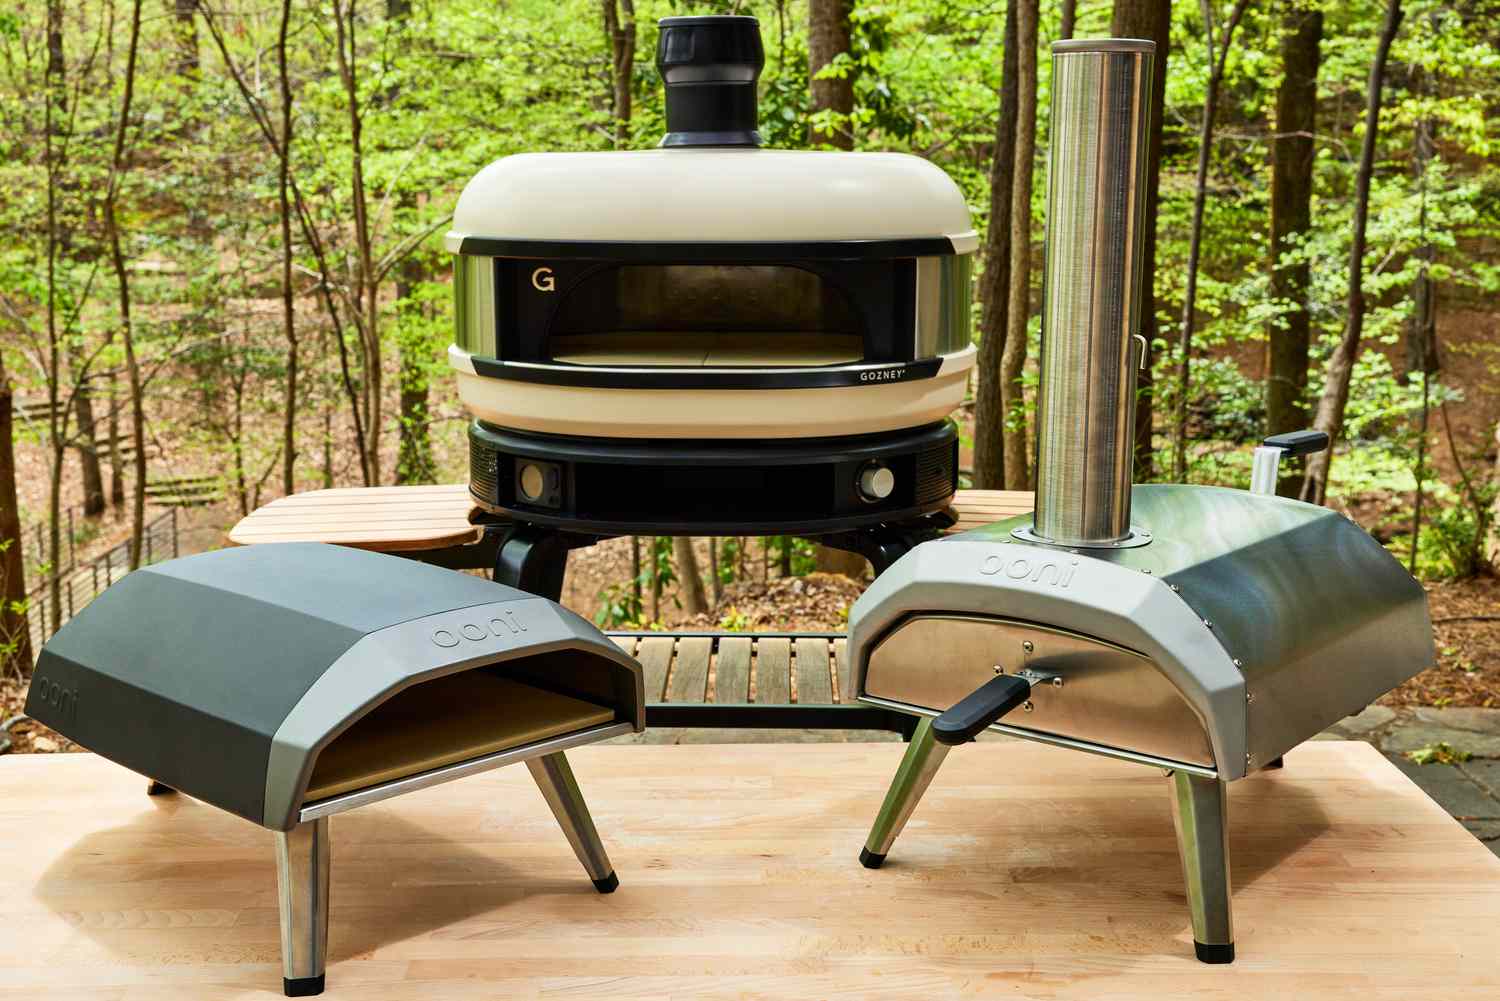  VEVOR Portable Pizza Oven, 12 Pellet Pizza Oven, Stainless  Steel Pizza Oven Outdoor, Wood Burning Pizza Oven w/Foldable Feet Portable  Wood Oven w/Complete Accessories & Pizza Bag for Outdoor Cooking 